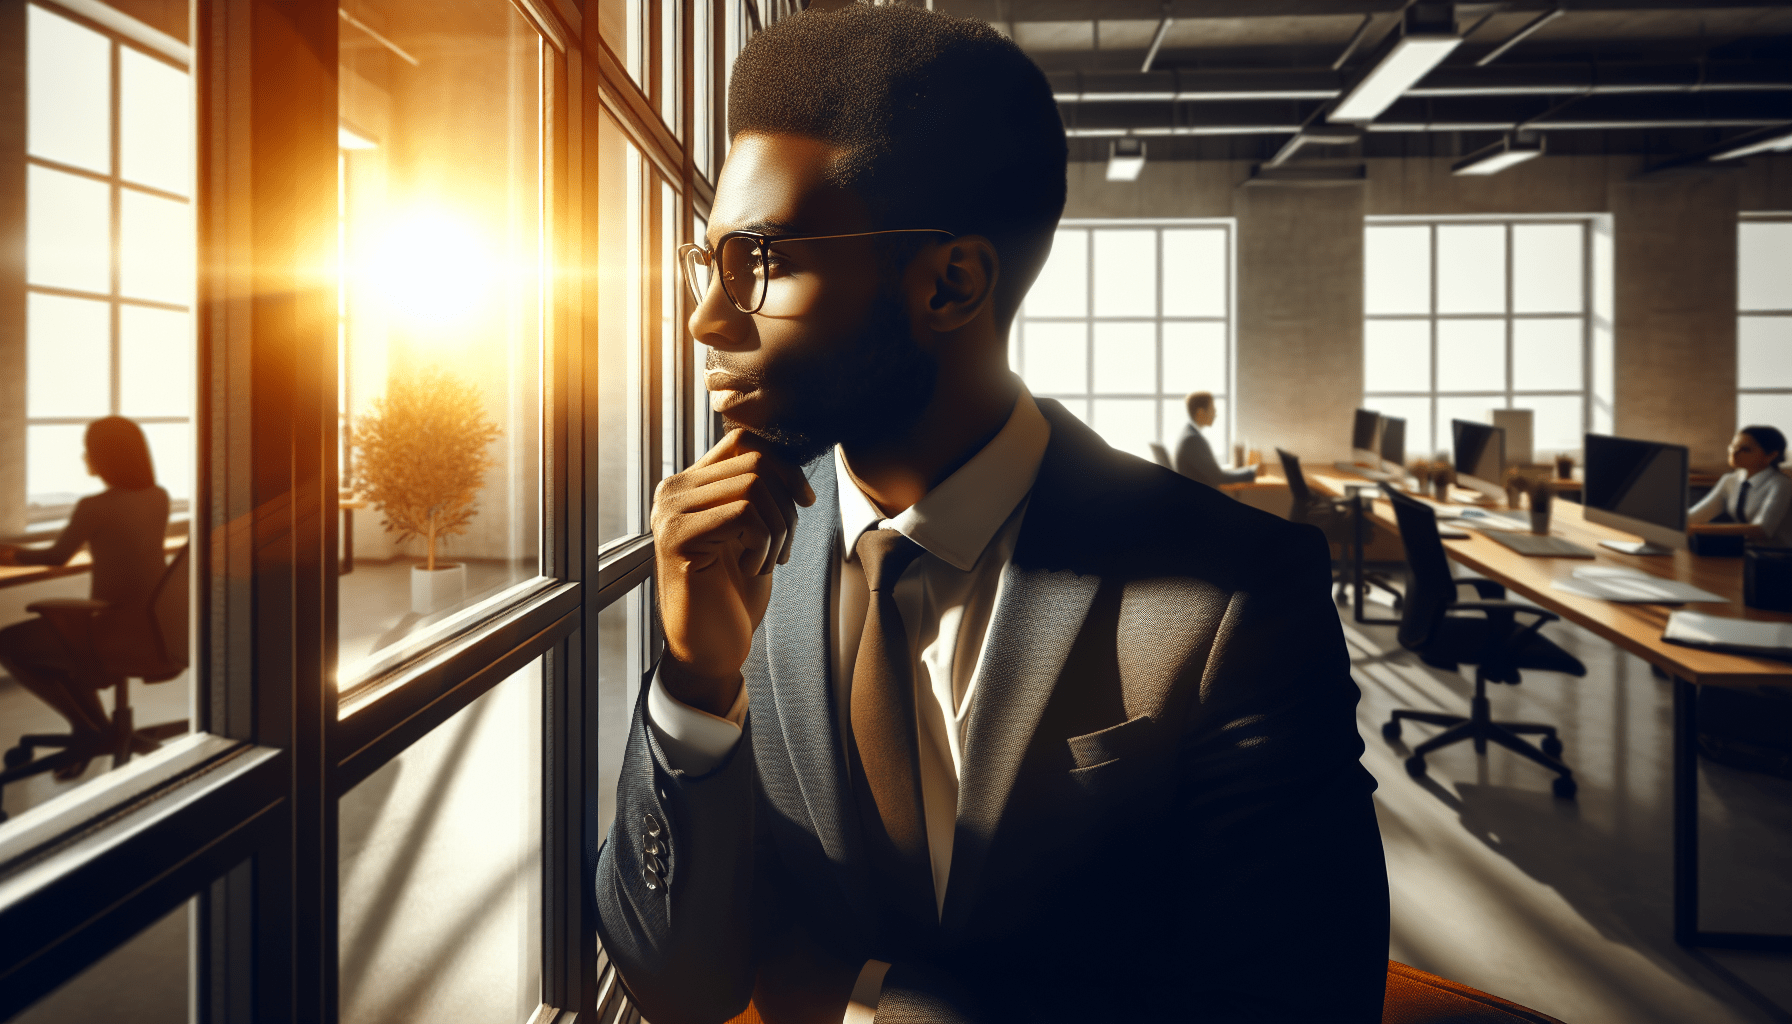 Man in suit with glasses looking contemplatively out a sunlit office window while others work in background.